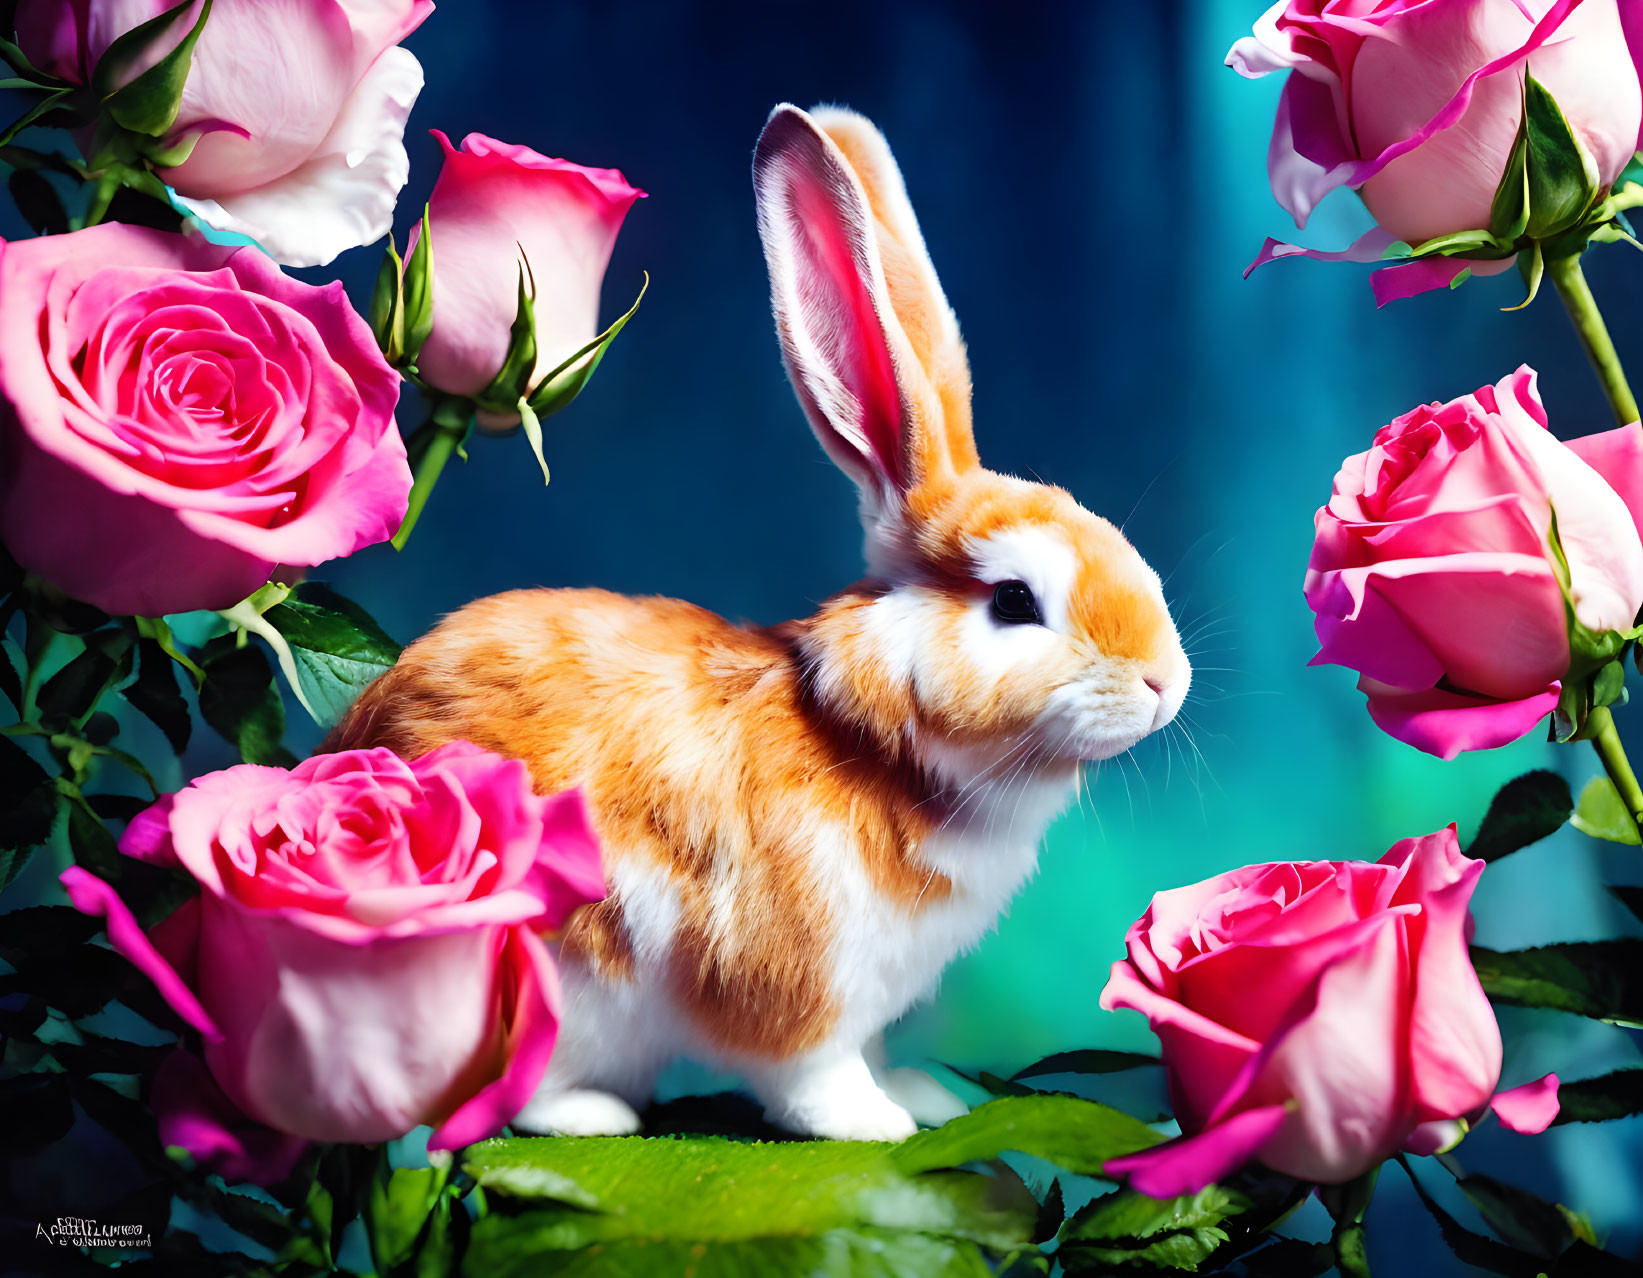 Orange and White Rabbit with Pink Roses on Blurred Blue Background